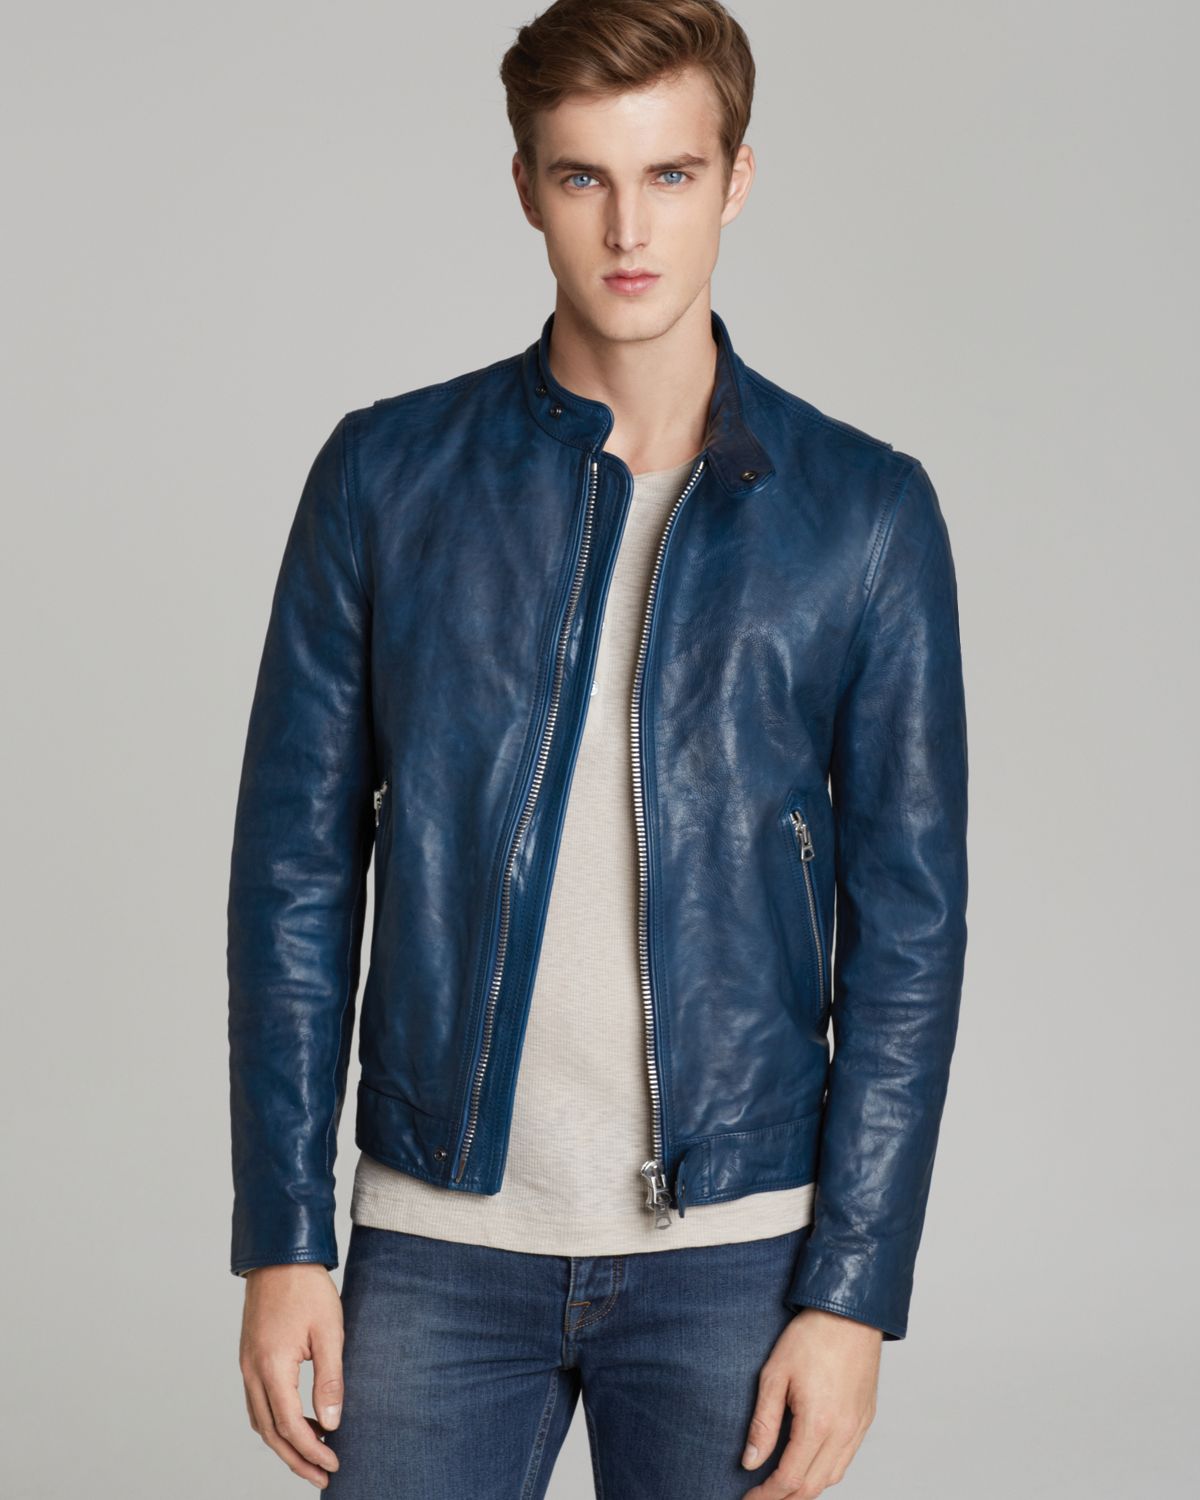 Lyst - Burberry Brit Dolmain Leather Jacket in Blue for Men